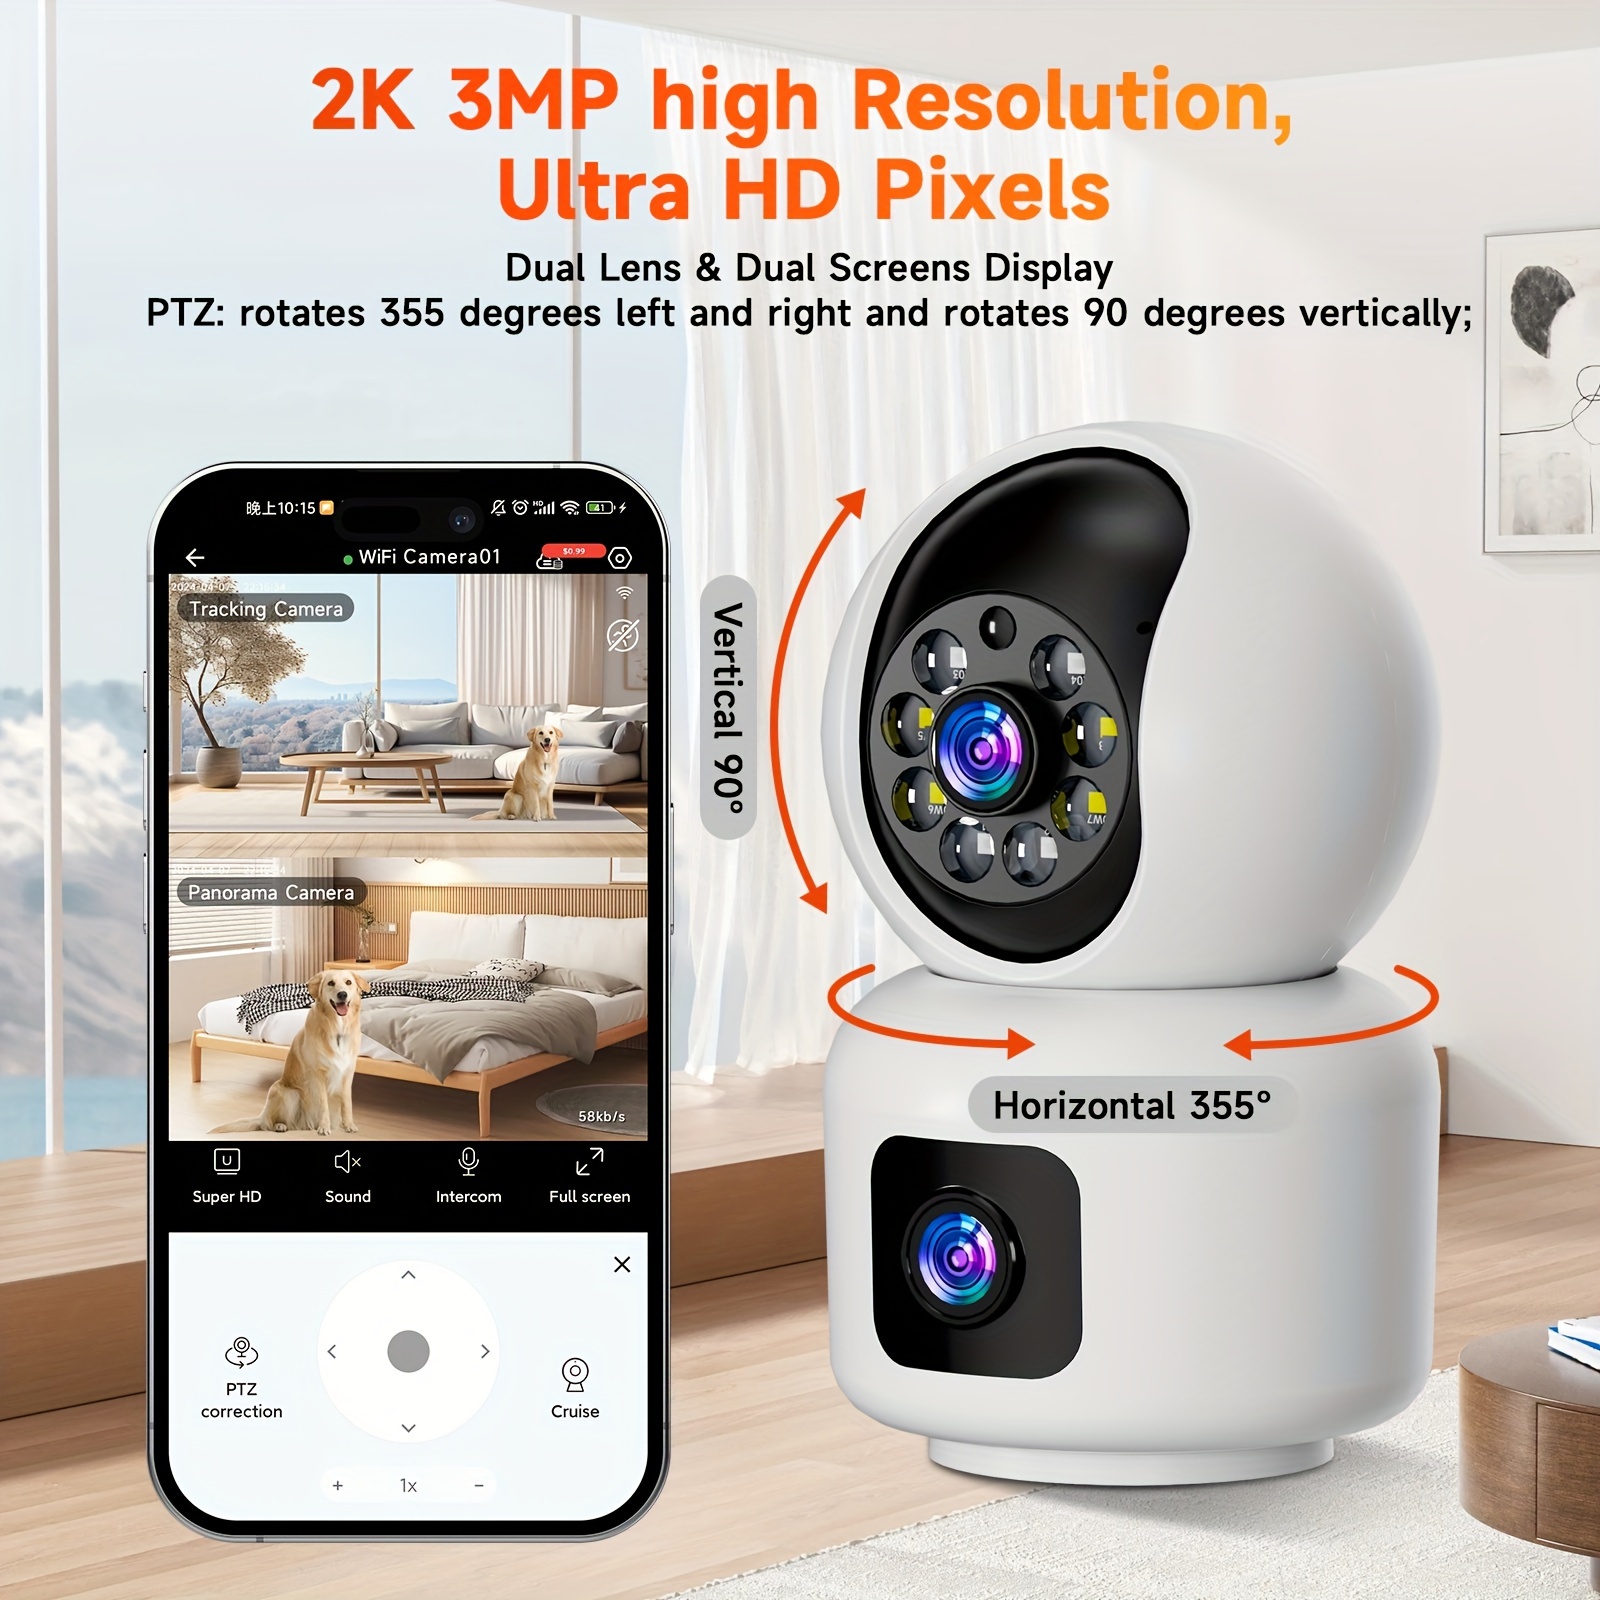 

Dual-lens-dual-screen Cctv Indoor 3p2k Pet Camera Mobile Phone Controls The Built-in Microphone To Rotate 360 Degrees.